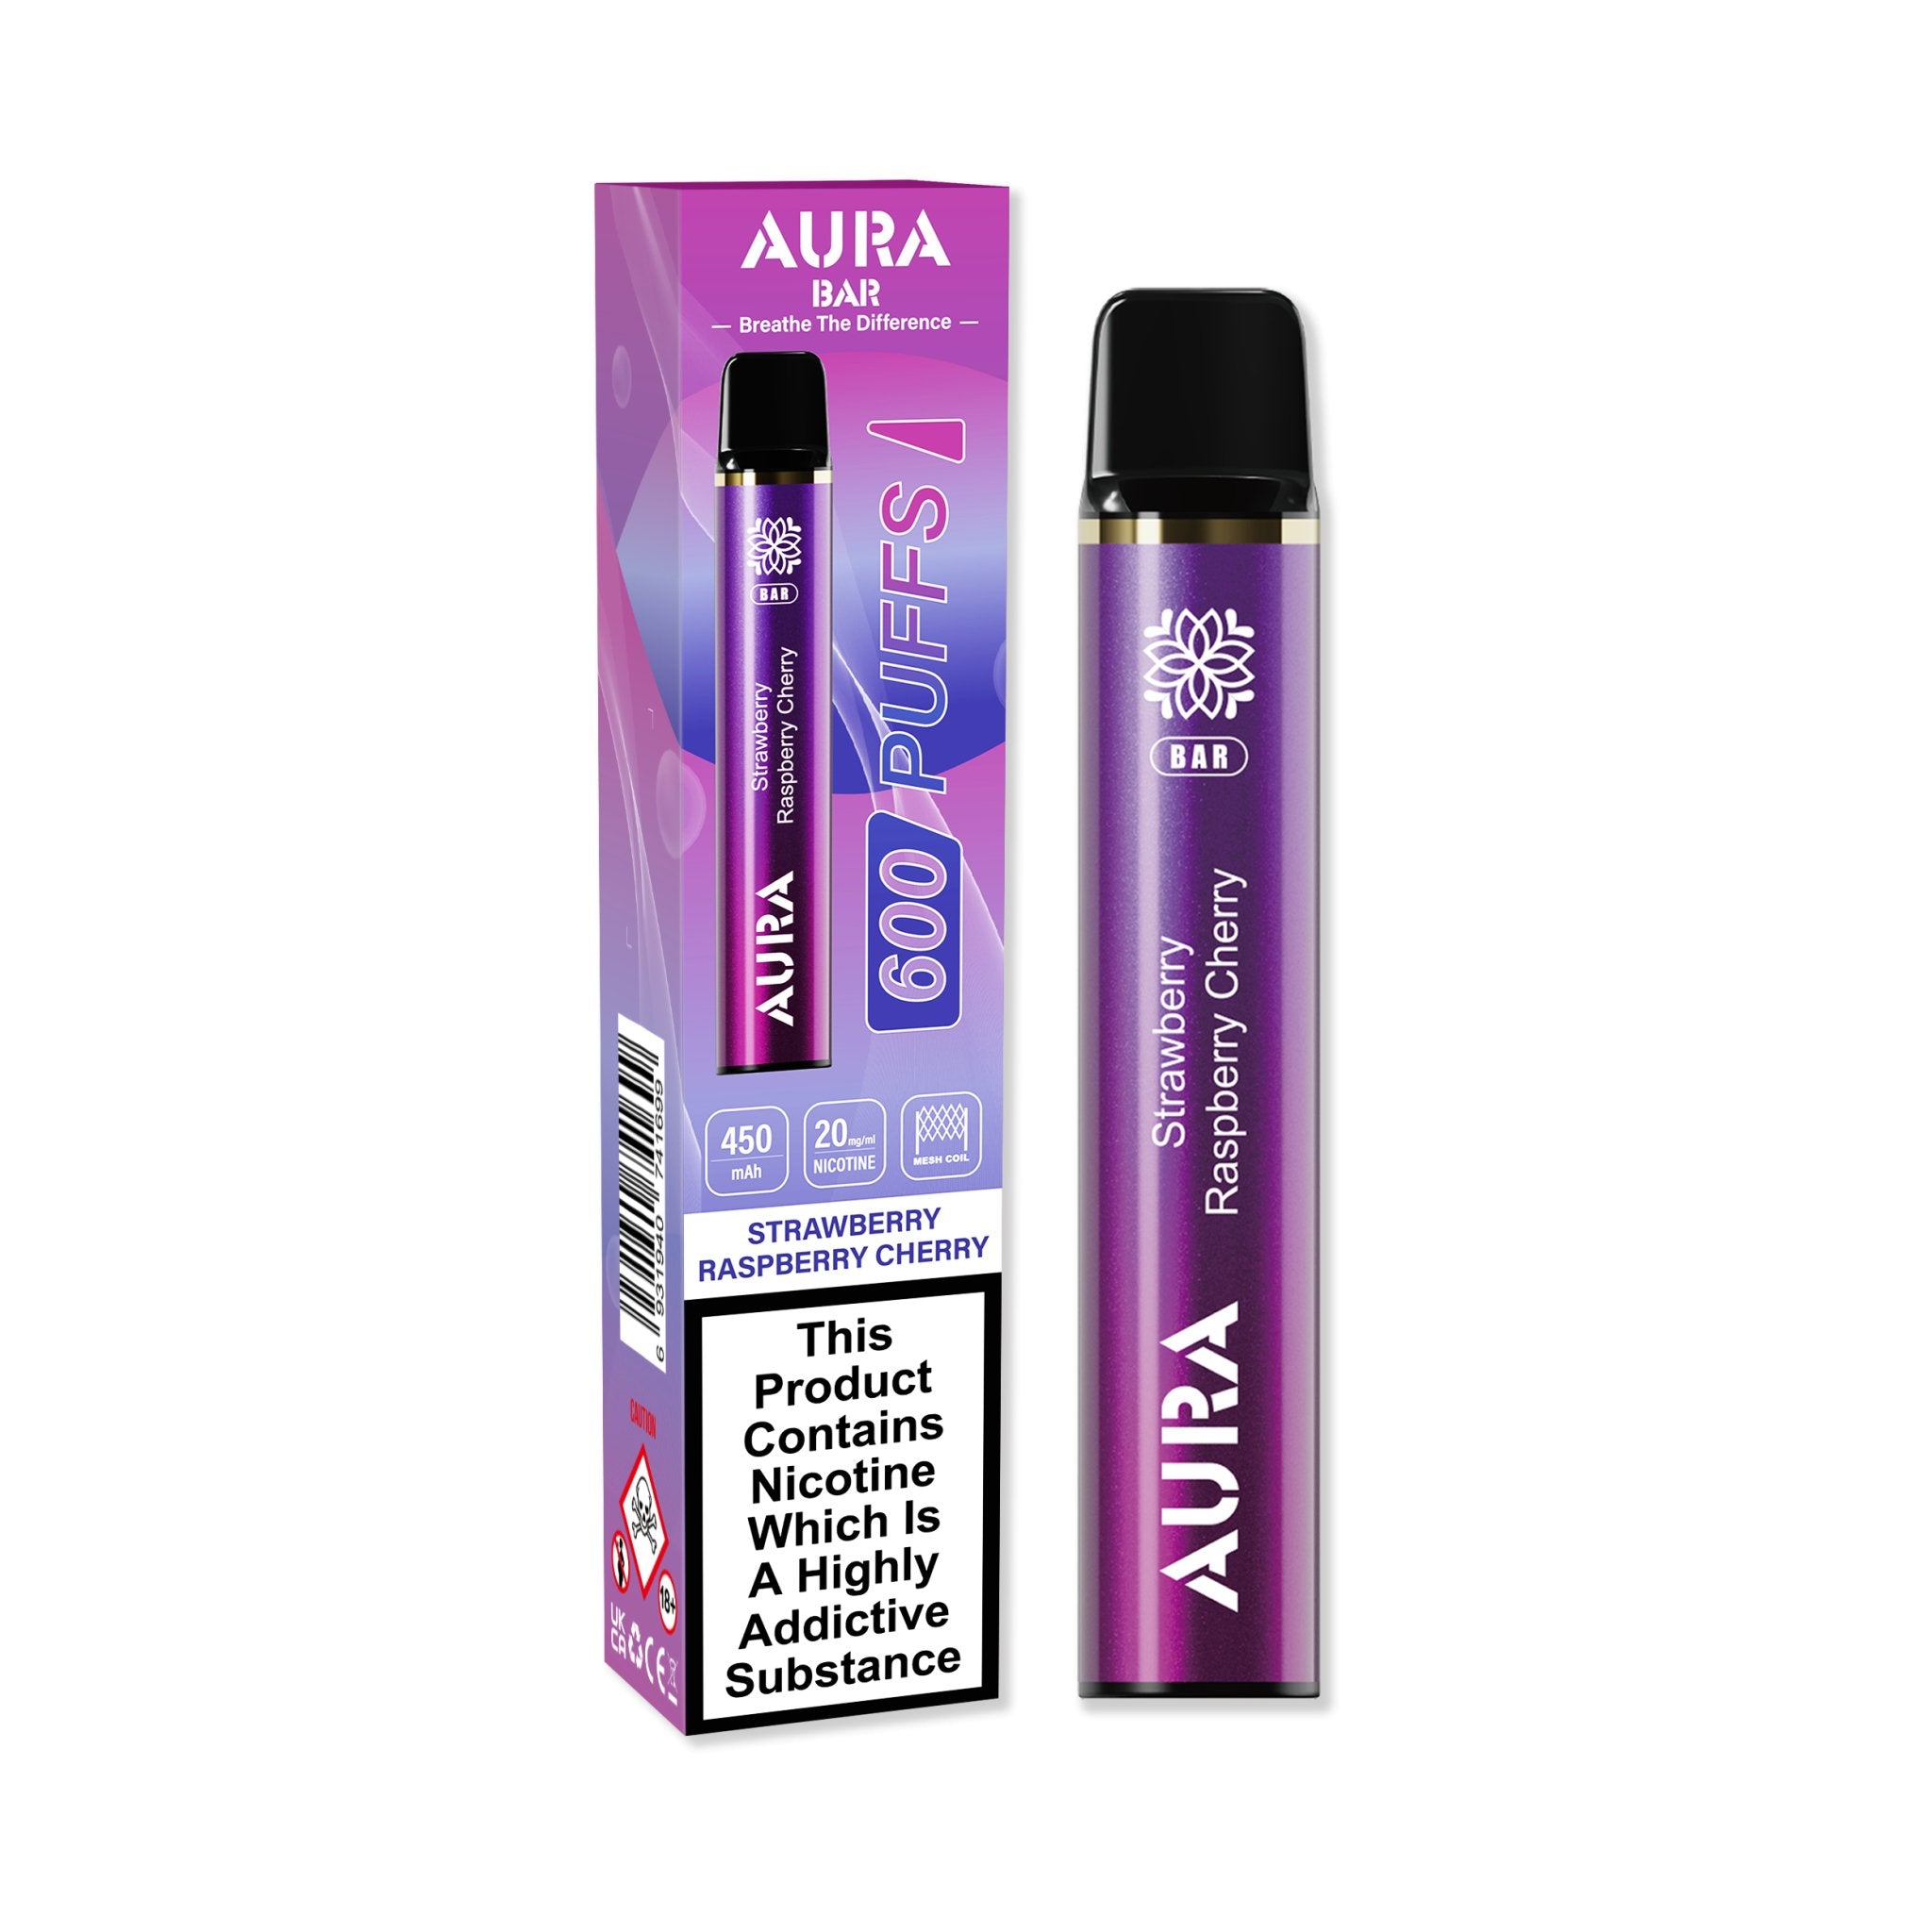 Aura Bar 600 Puffs Disposable Vape By Crystal Prime - Wolfvapes.co.uk-Strawberry Raspberry Cherry